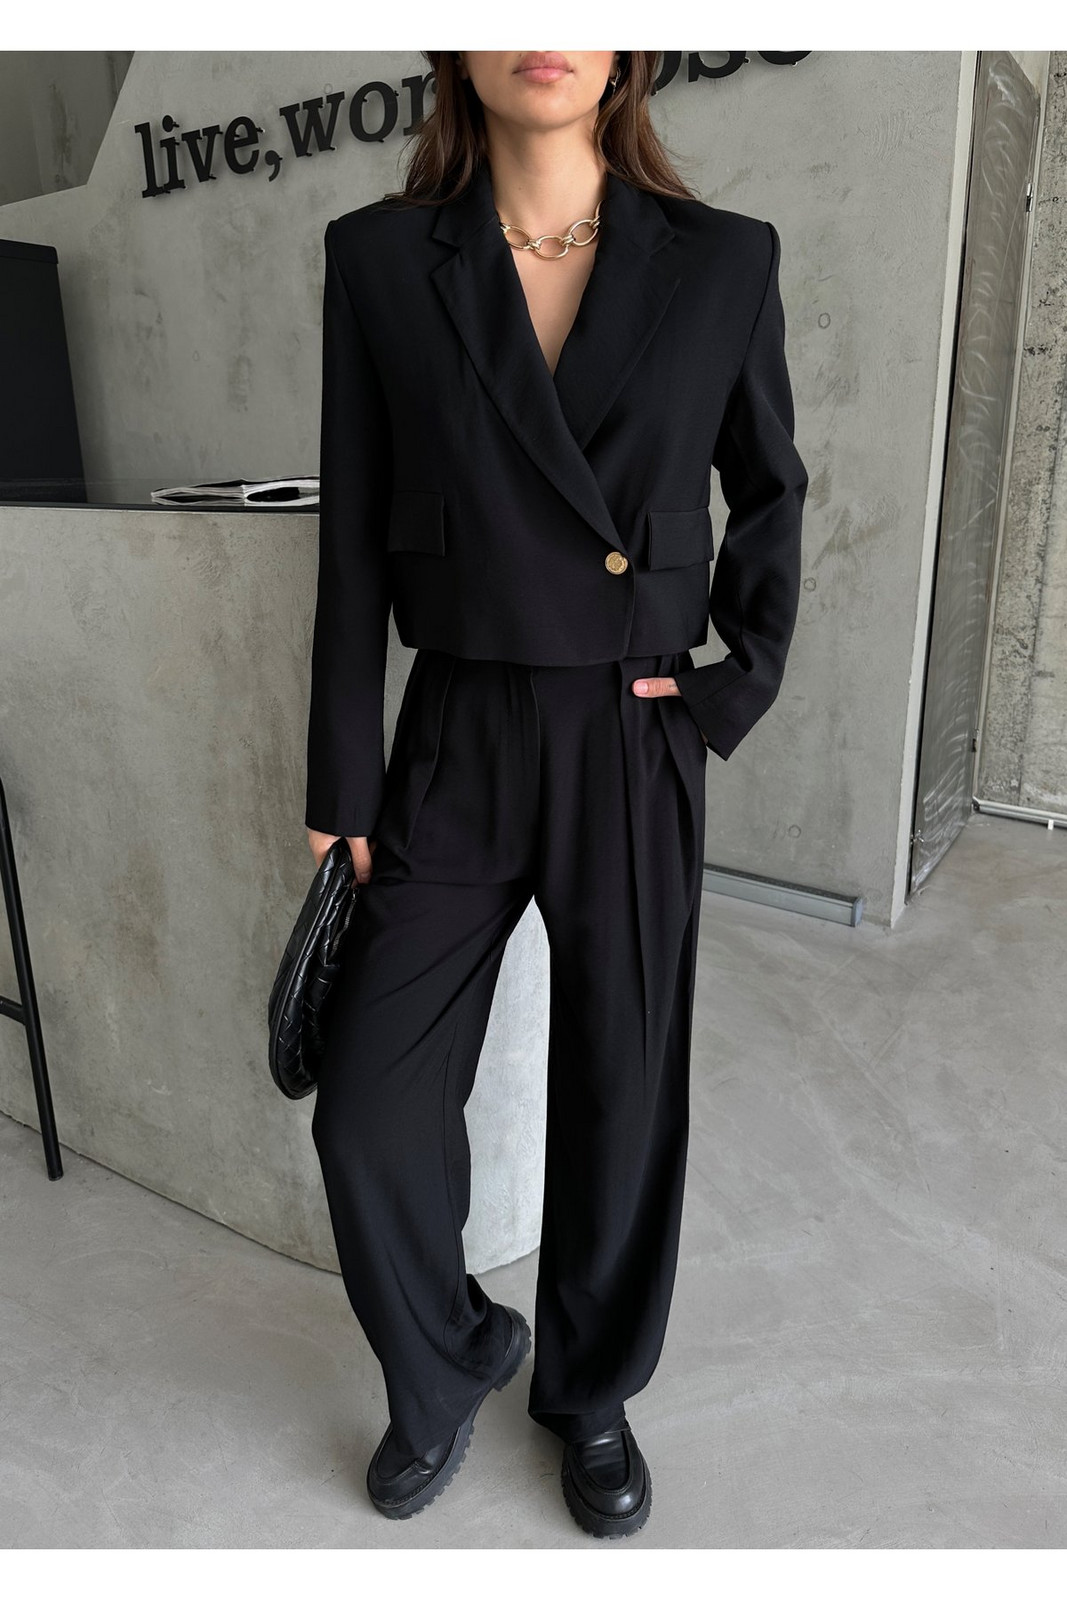 Laluvia Black Double Breasted Crop Jacket Palazzo Pants Suit